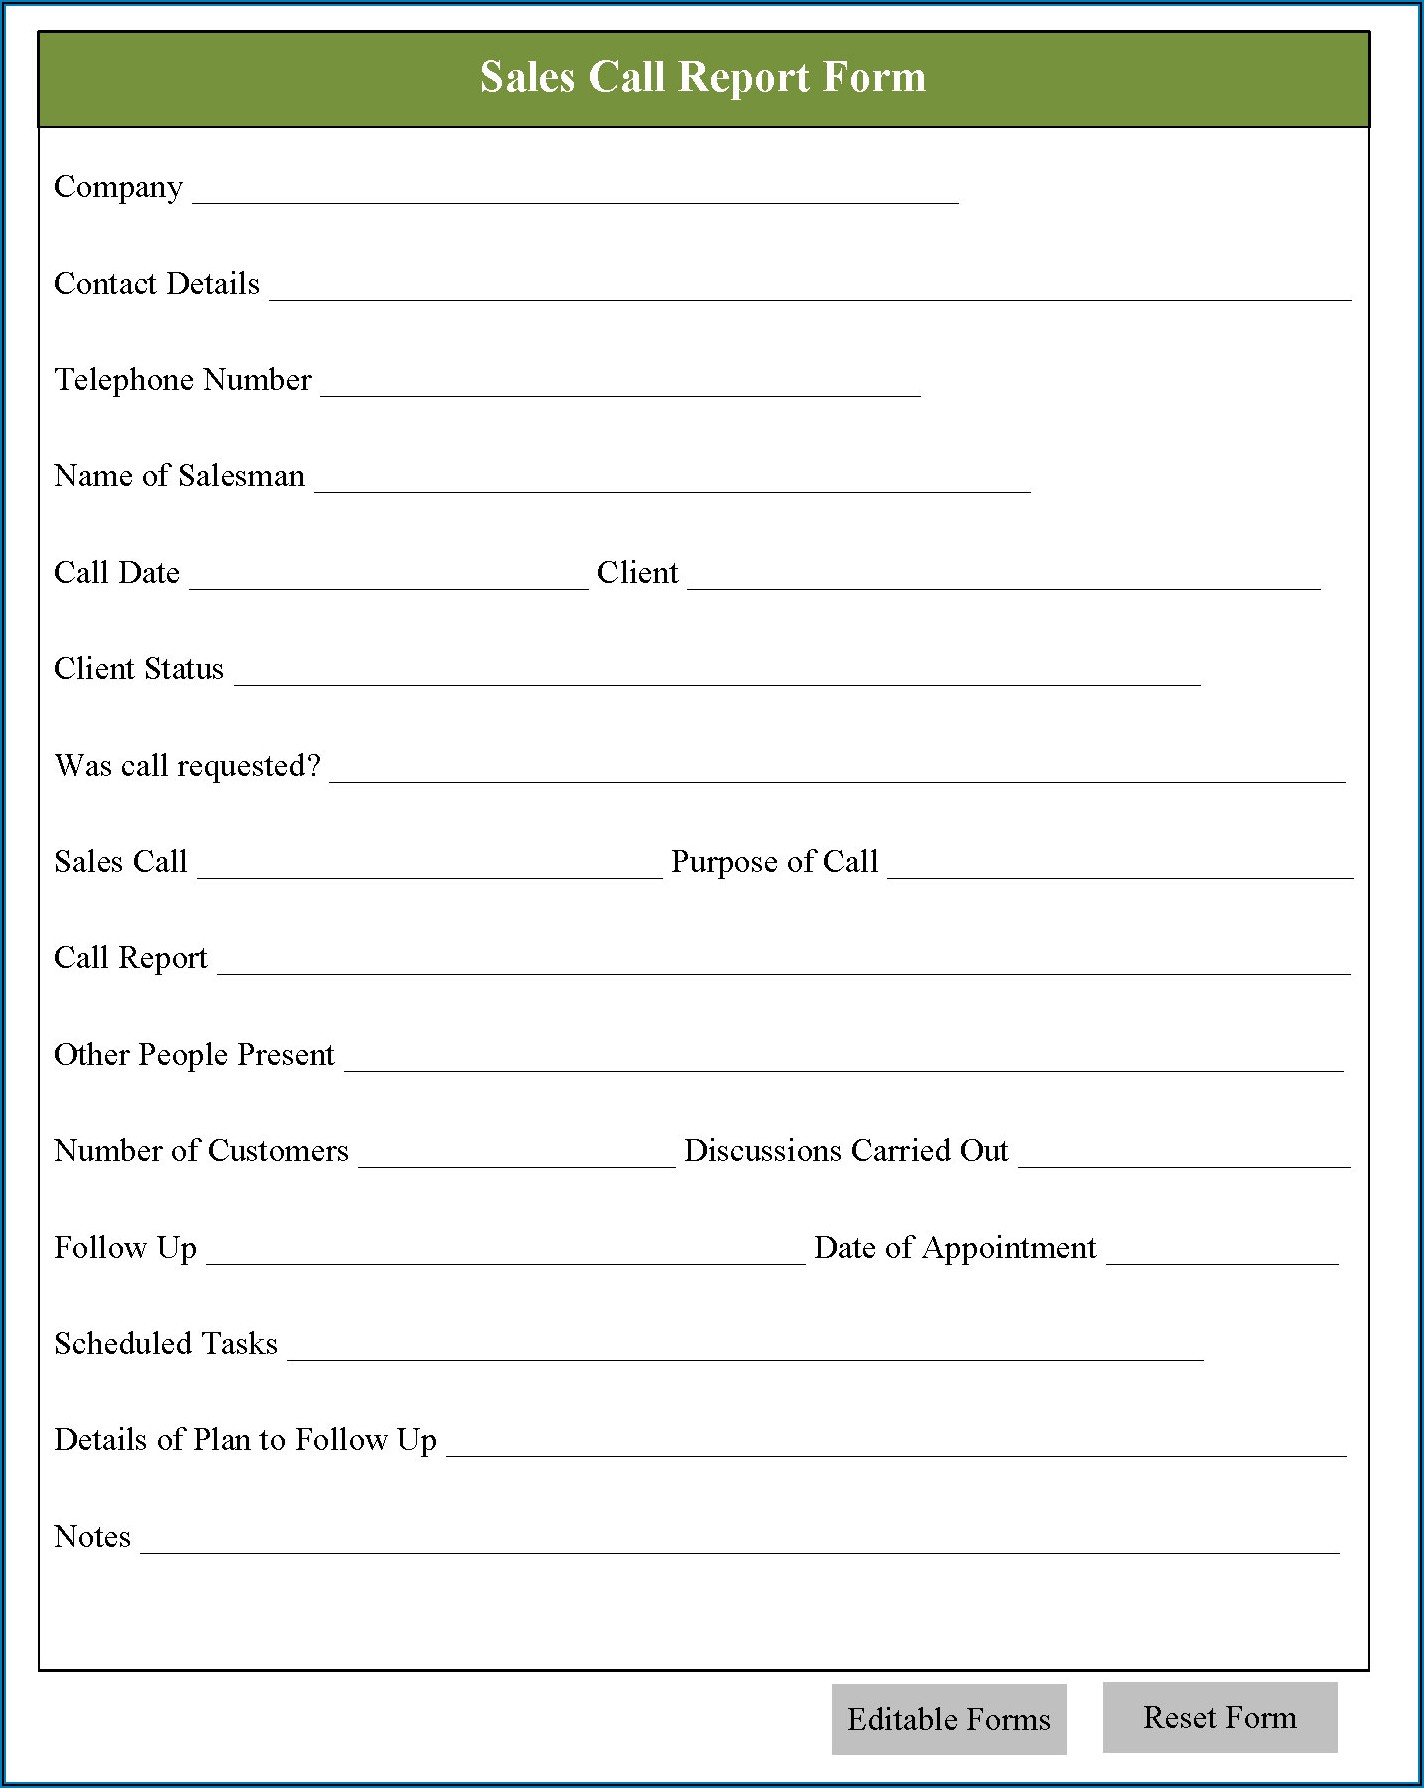 Sales Call Report Forms